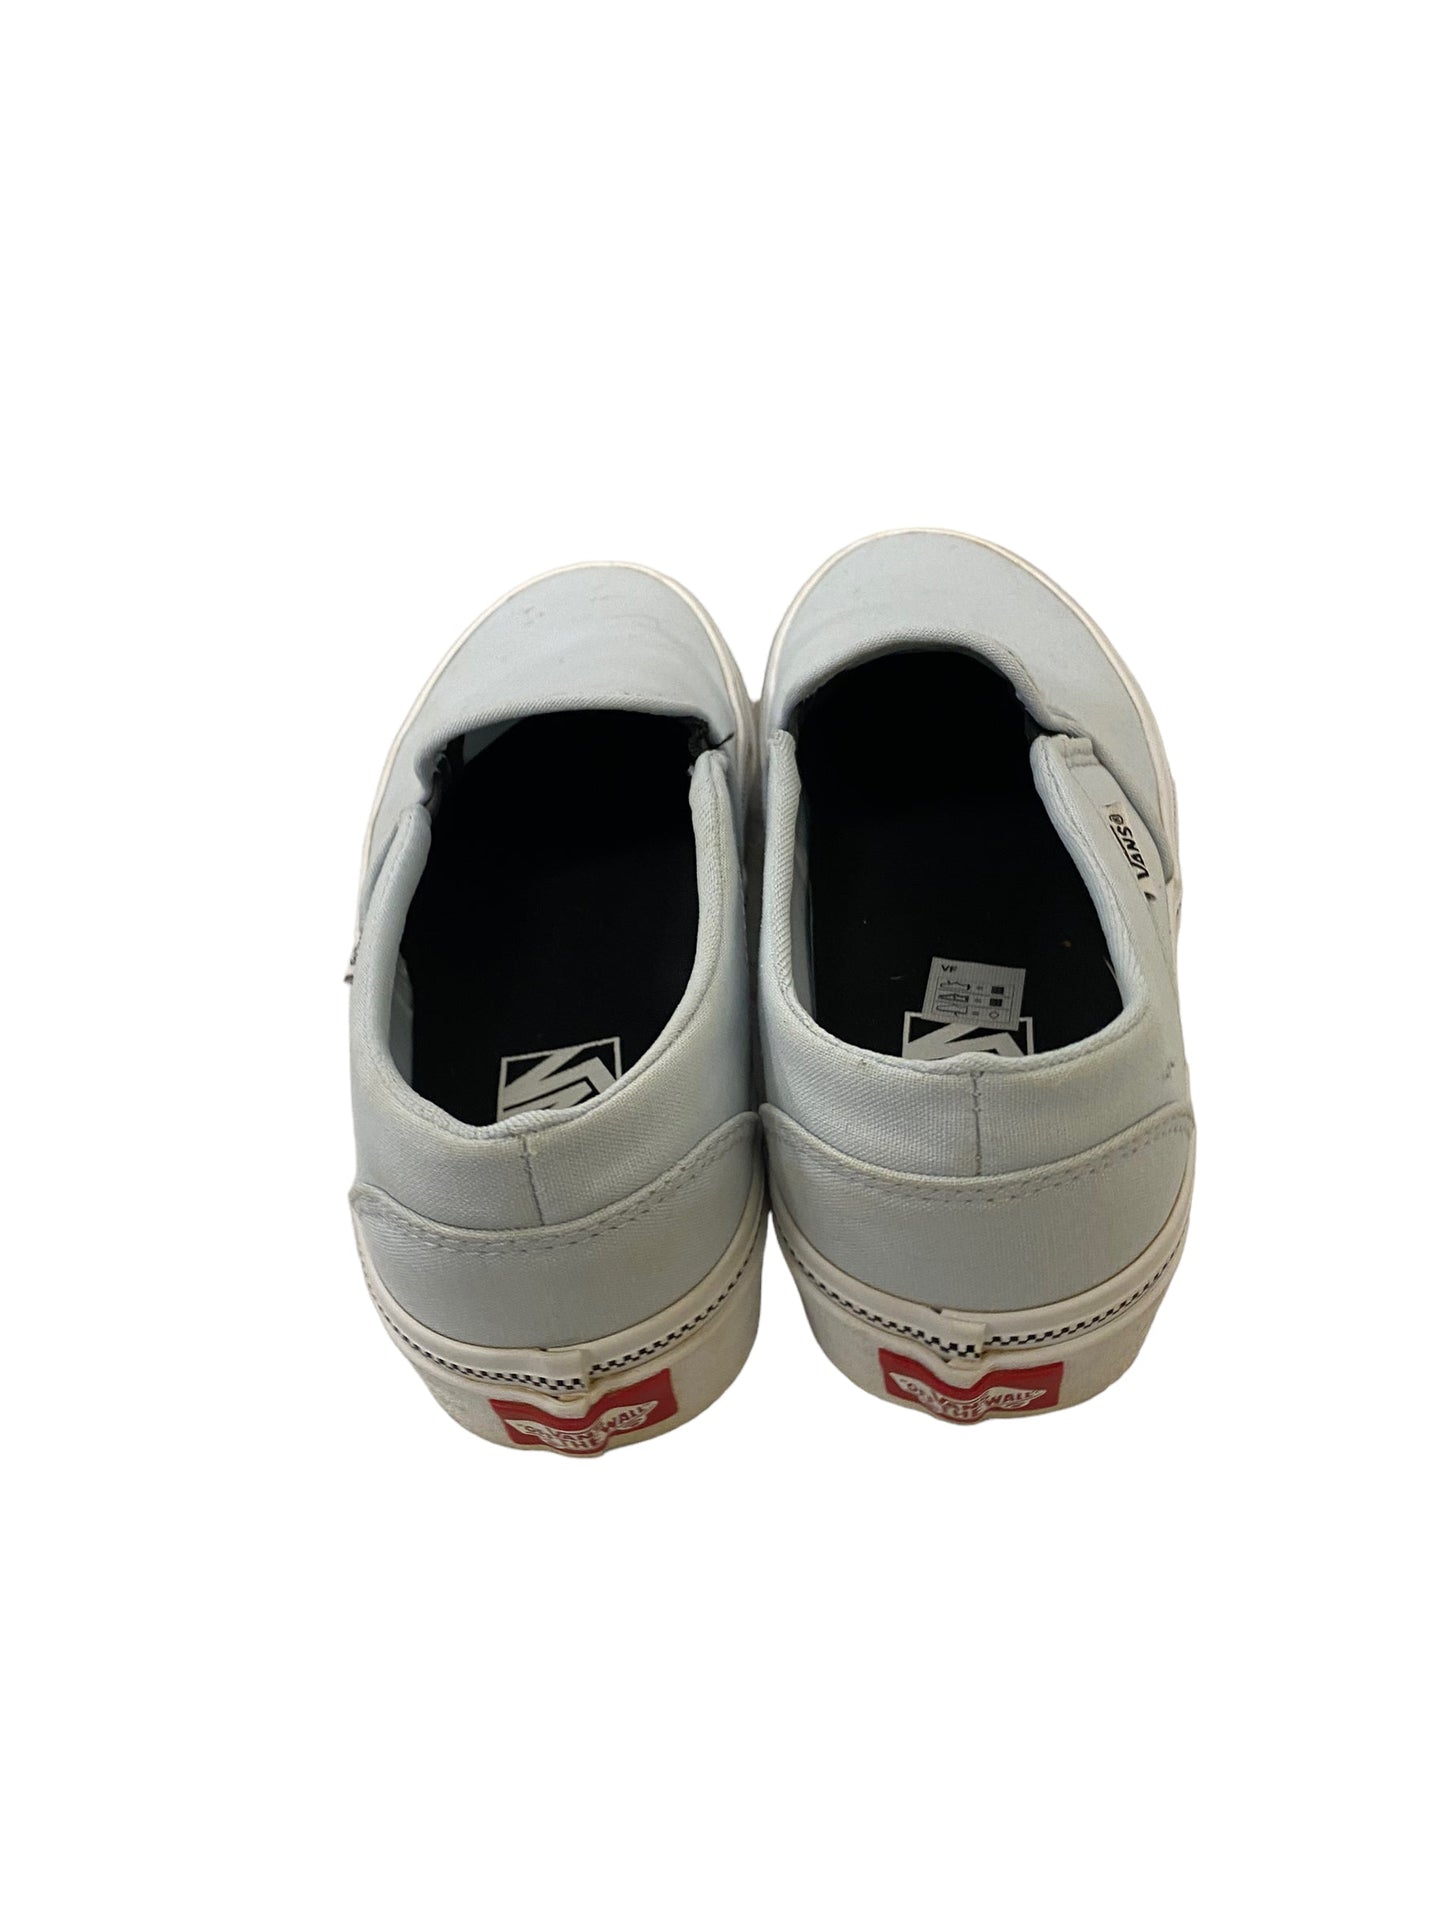 Shoes Flats Boat By Vans  Size: 7.5